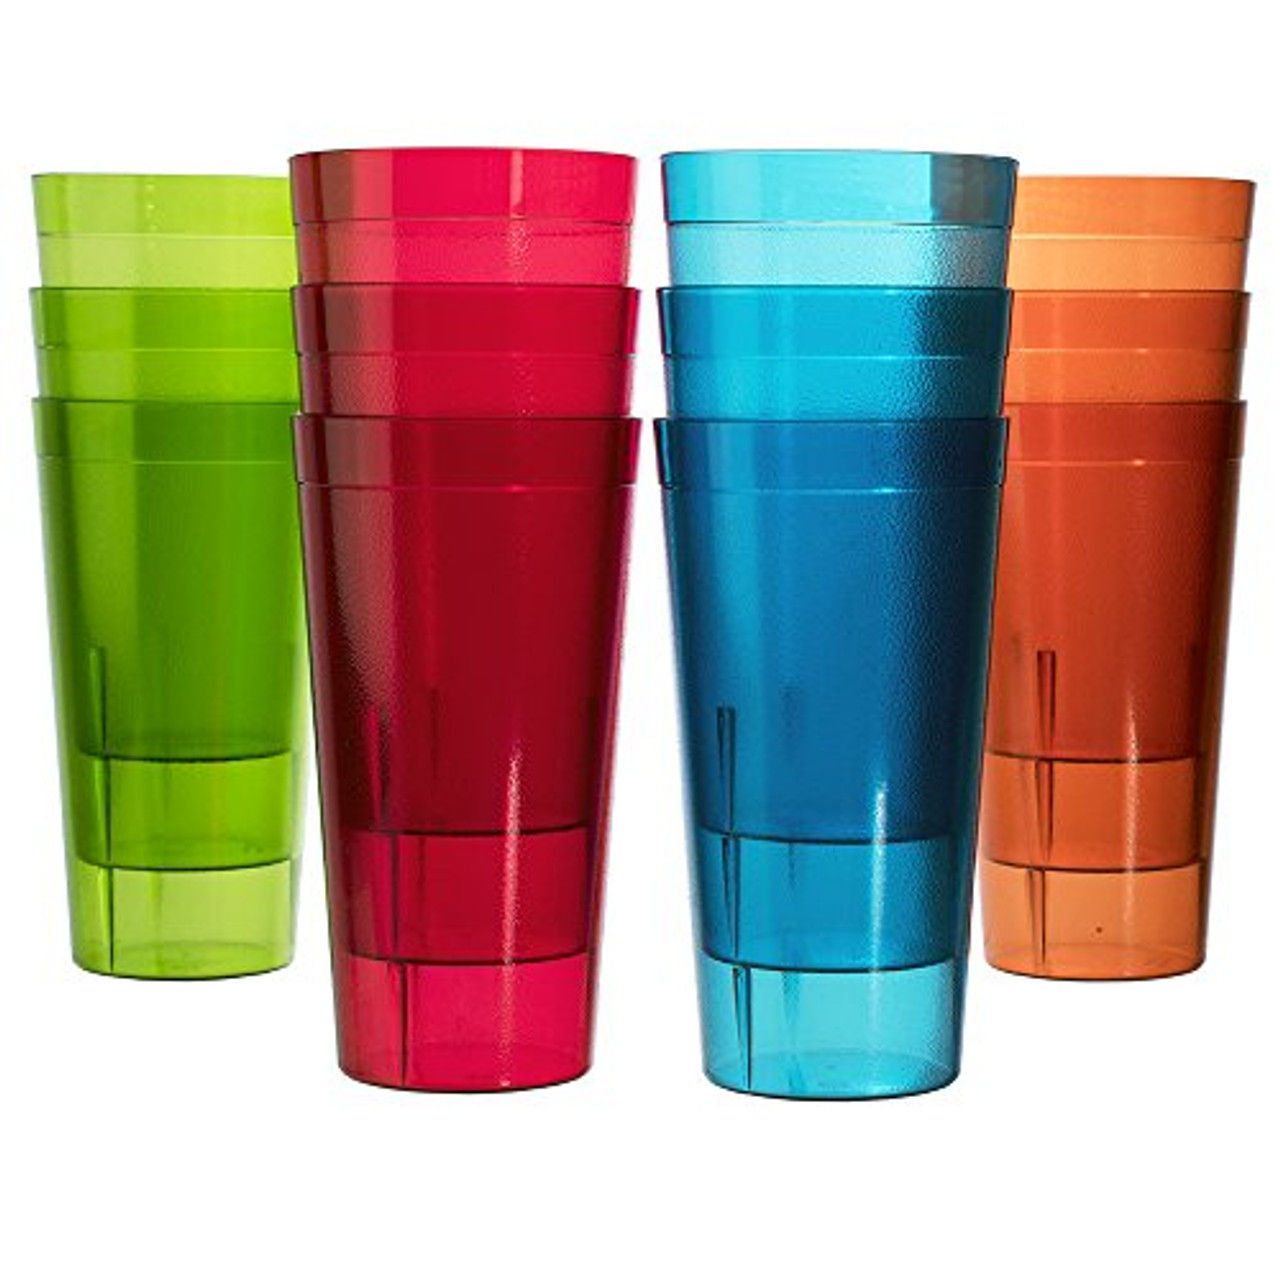 Caf 32-Ounce Plastic Restaurant Style Tumblers | Set of 12 in 4 Assorted Colors